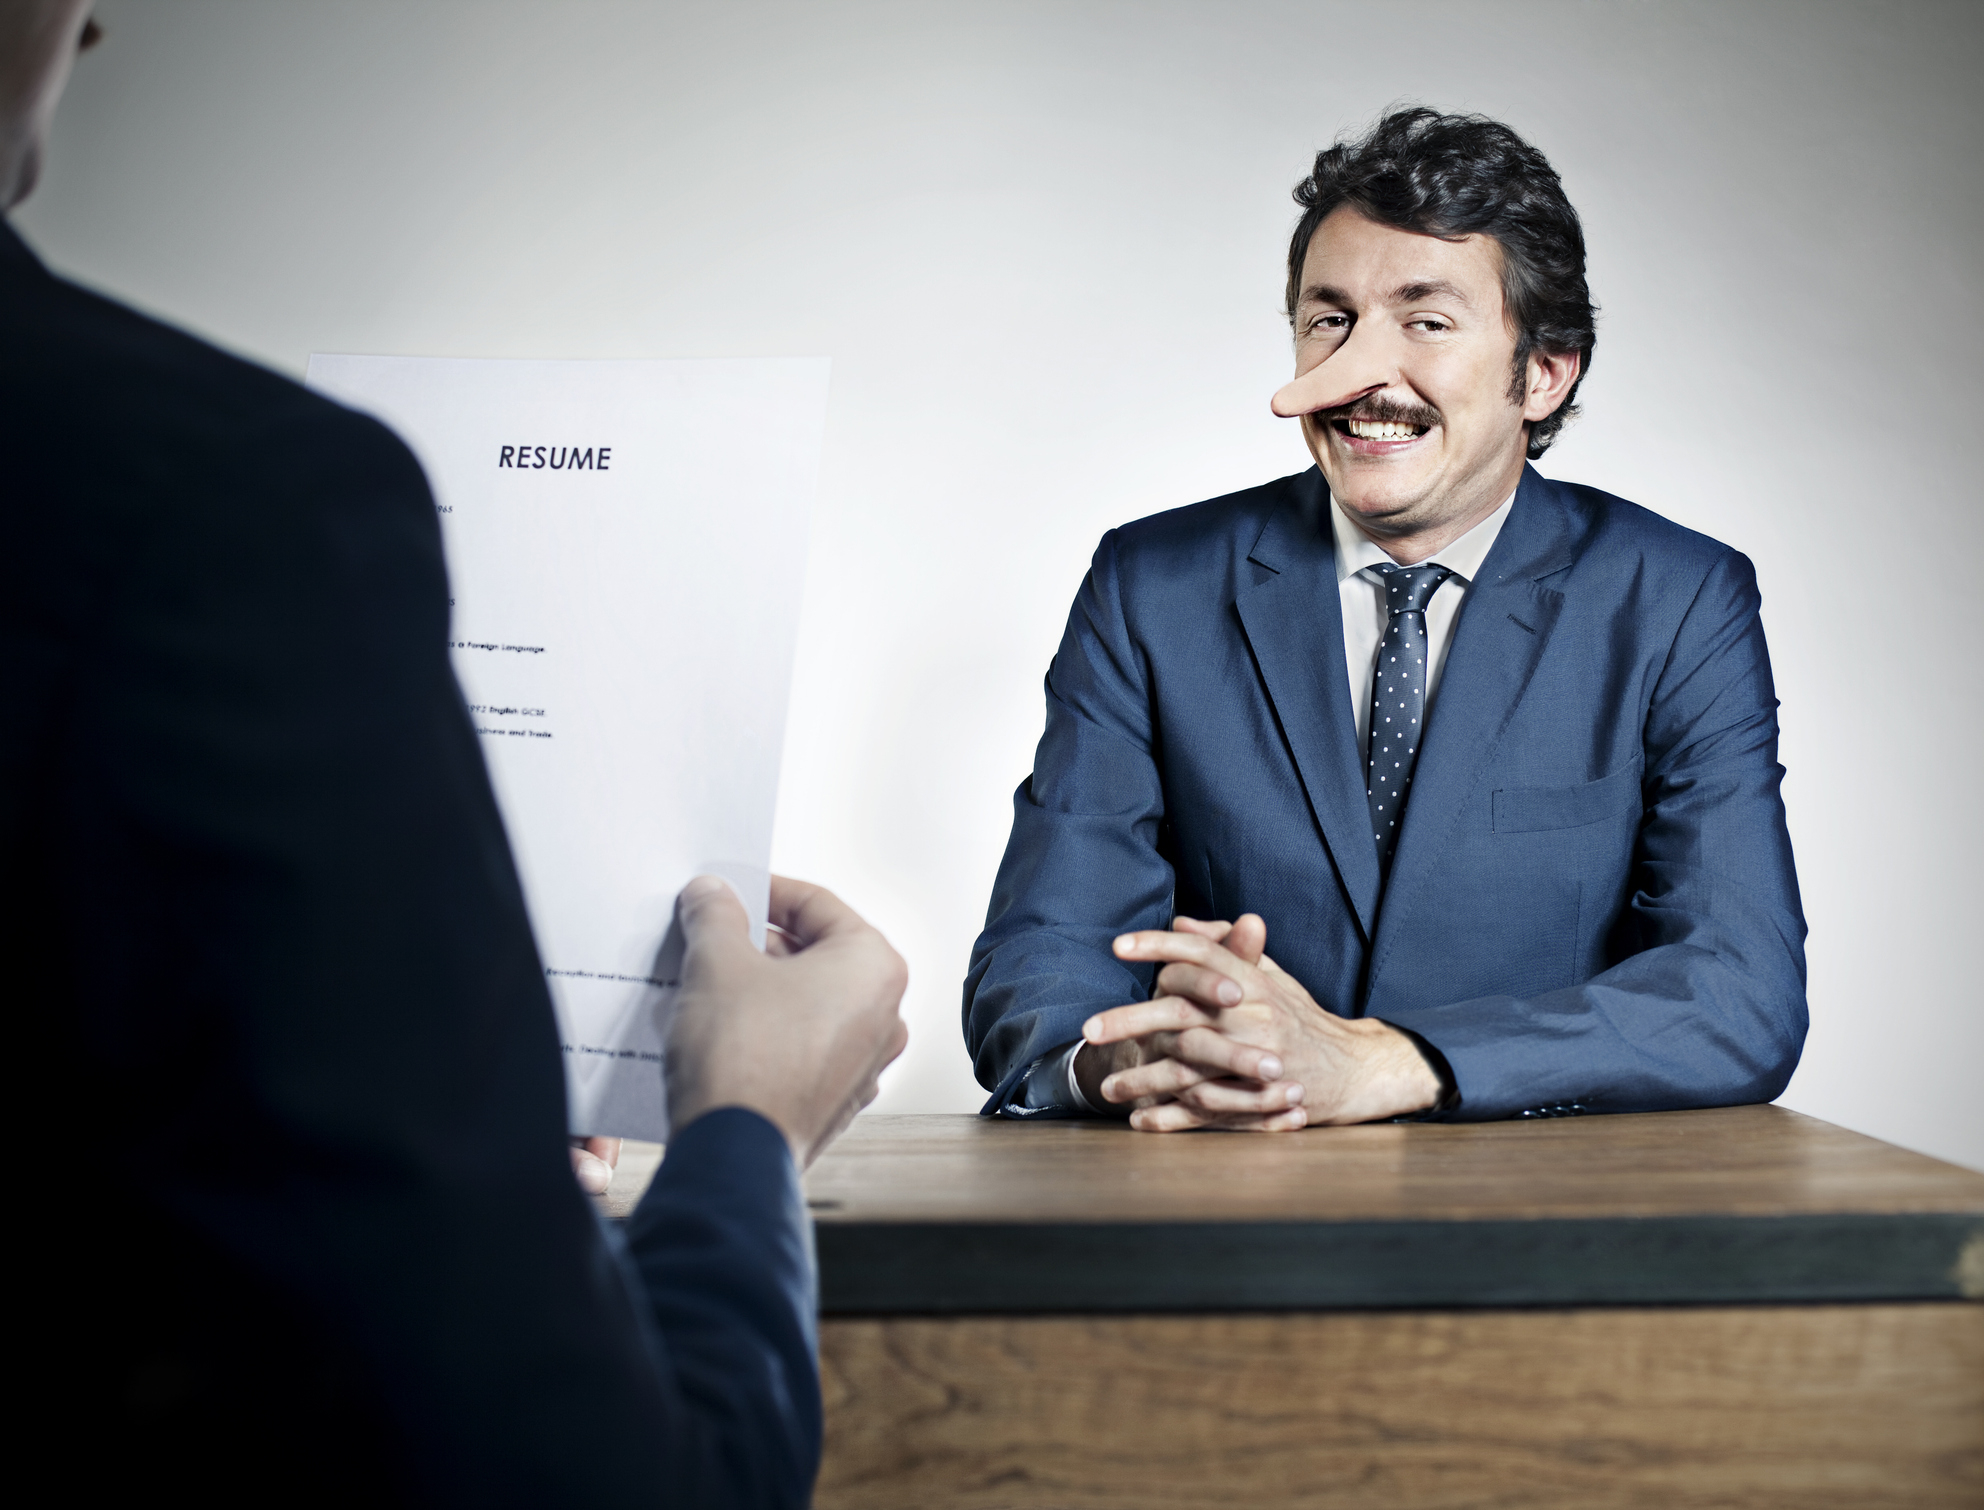 Person with a pen in nose smiles during a job interview, likely humor related to the &quot;Tasty&quot; category